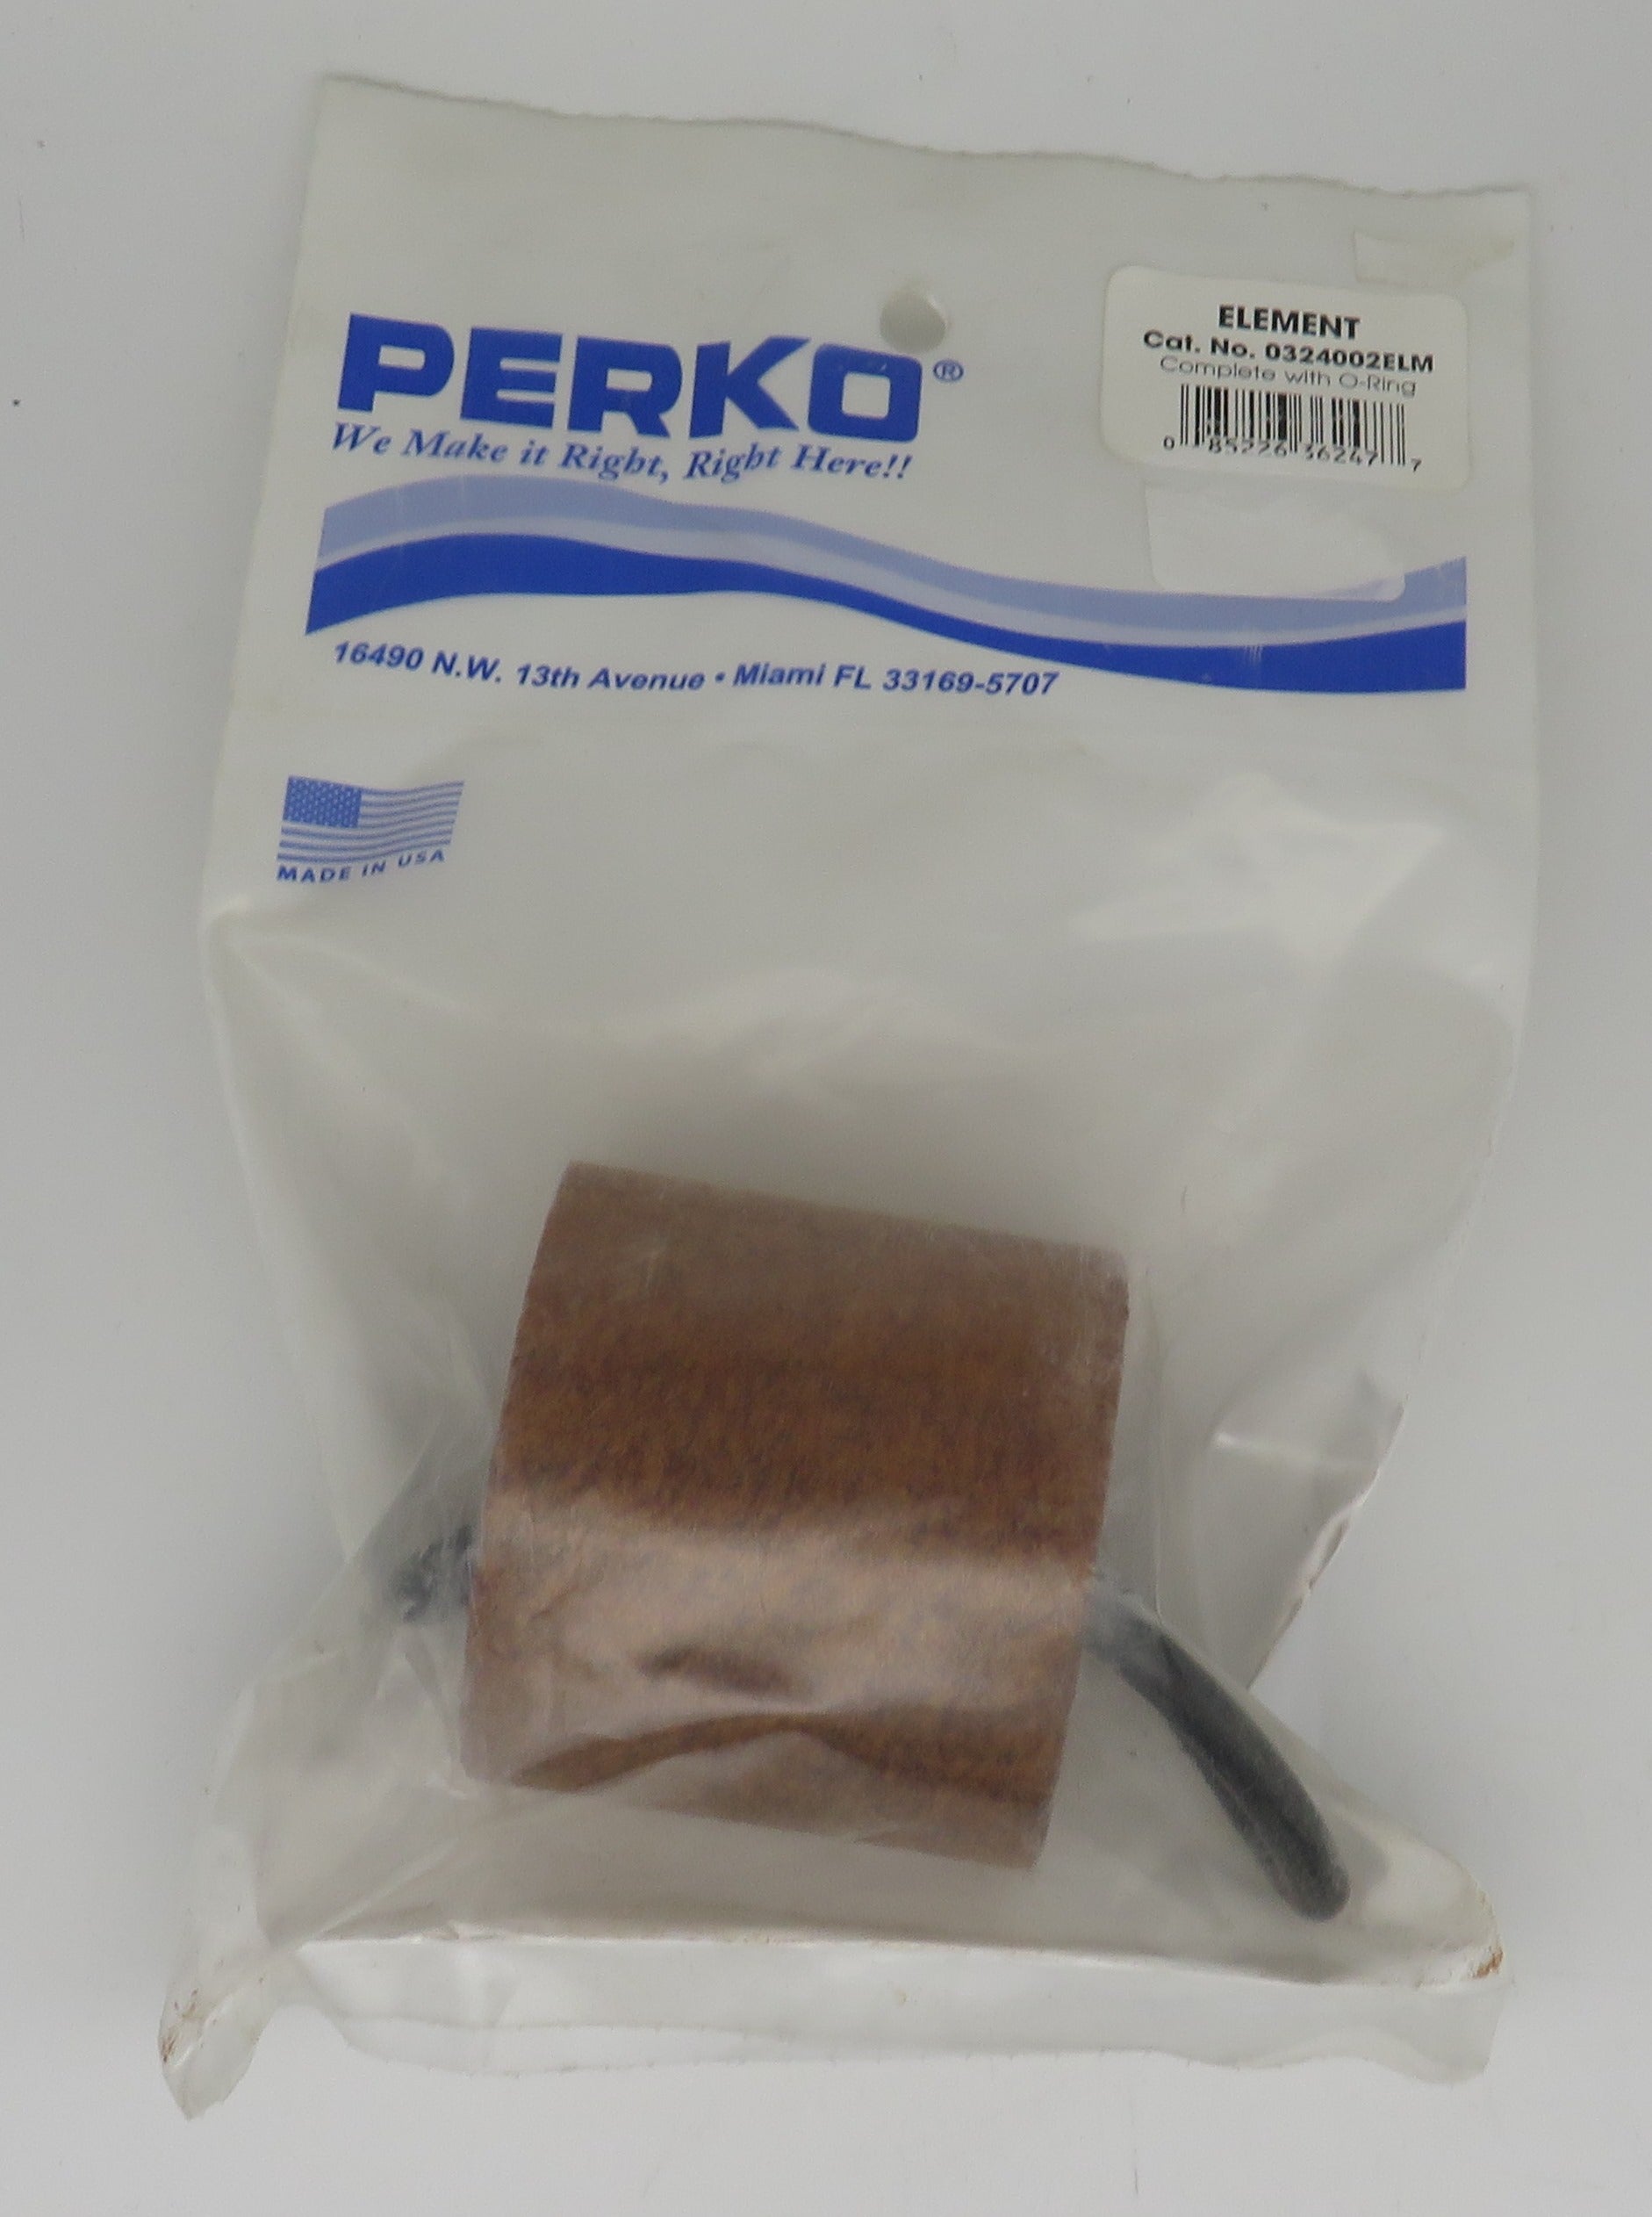 324-002 ELM Perko Fuel Filter Element With O-Ring